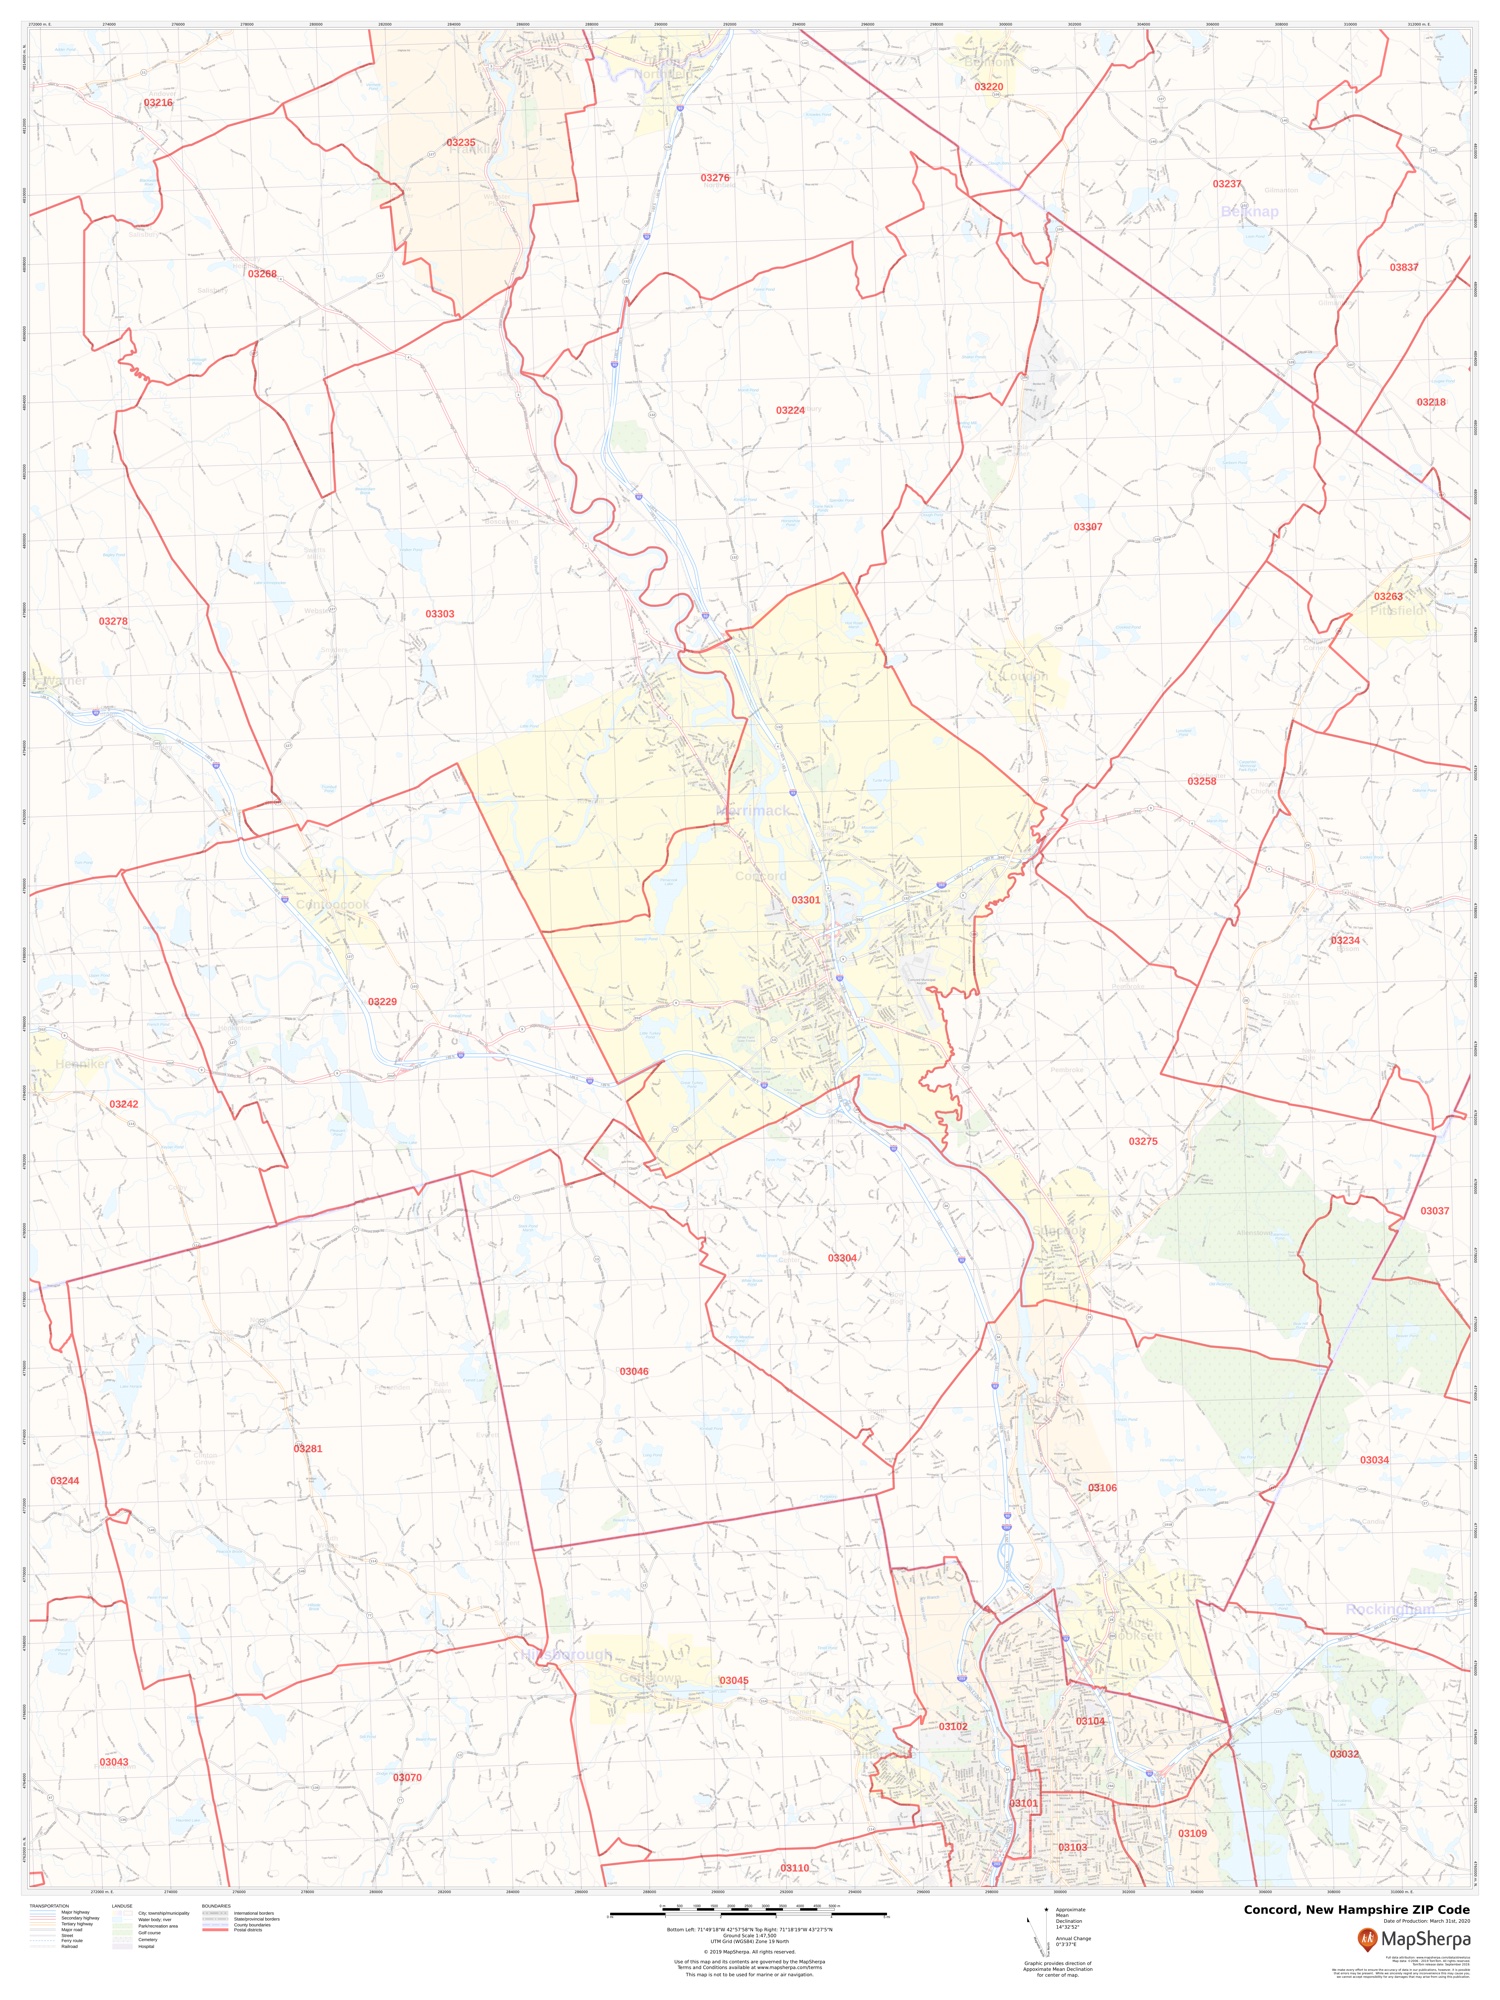 Concord NH Zip Code Map